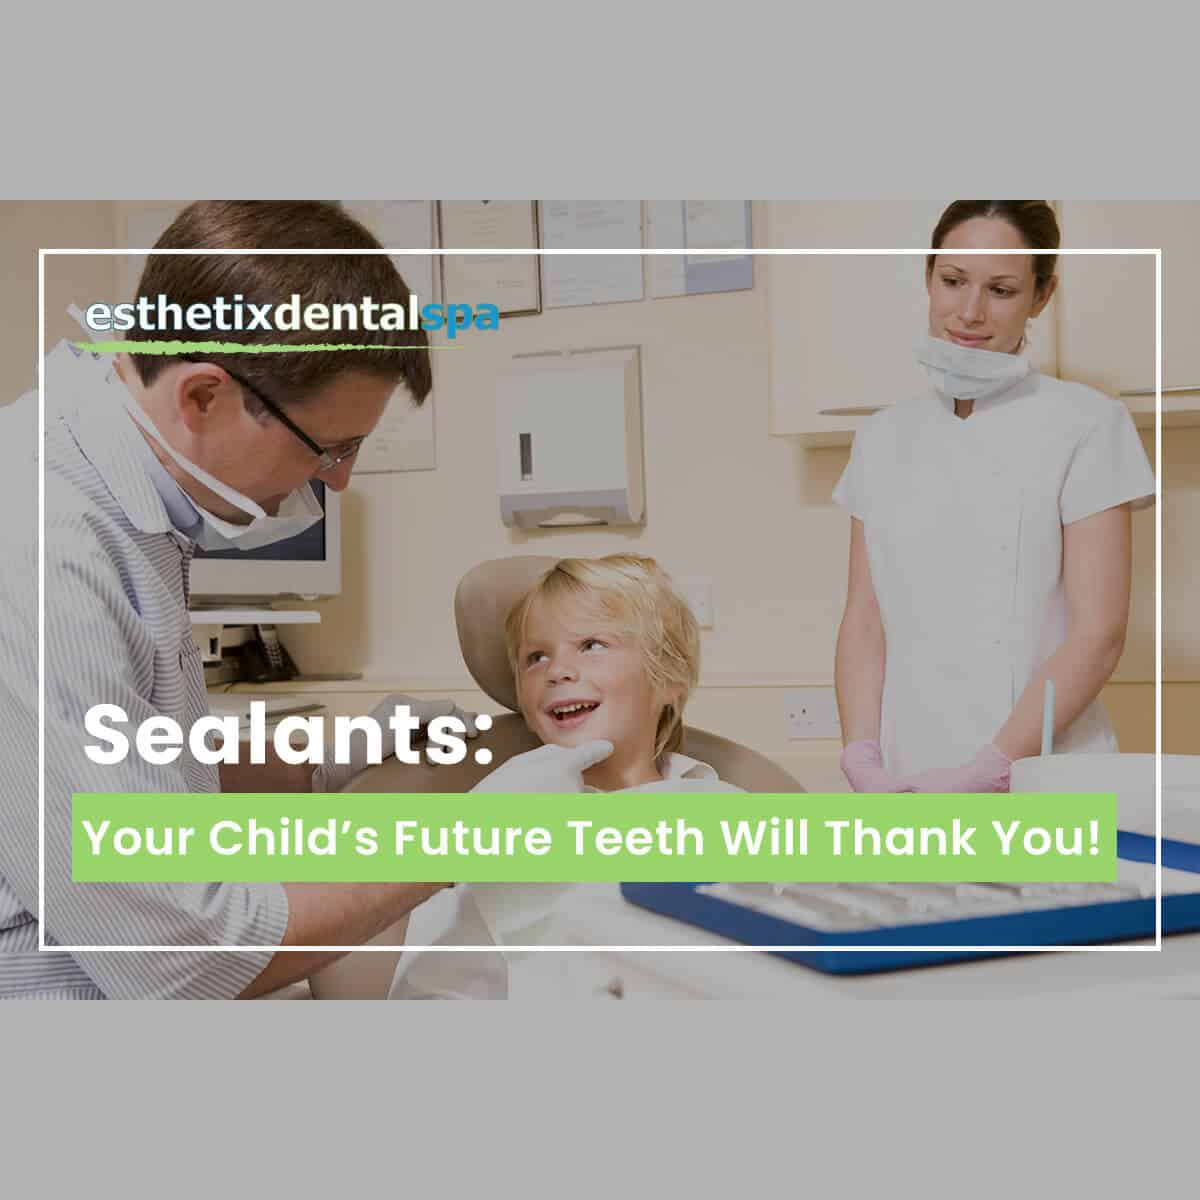 Sealants: Your Child's Future Teeth Will Thank You!